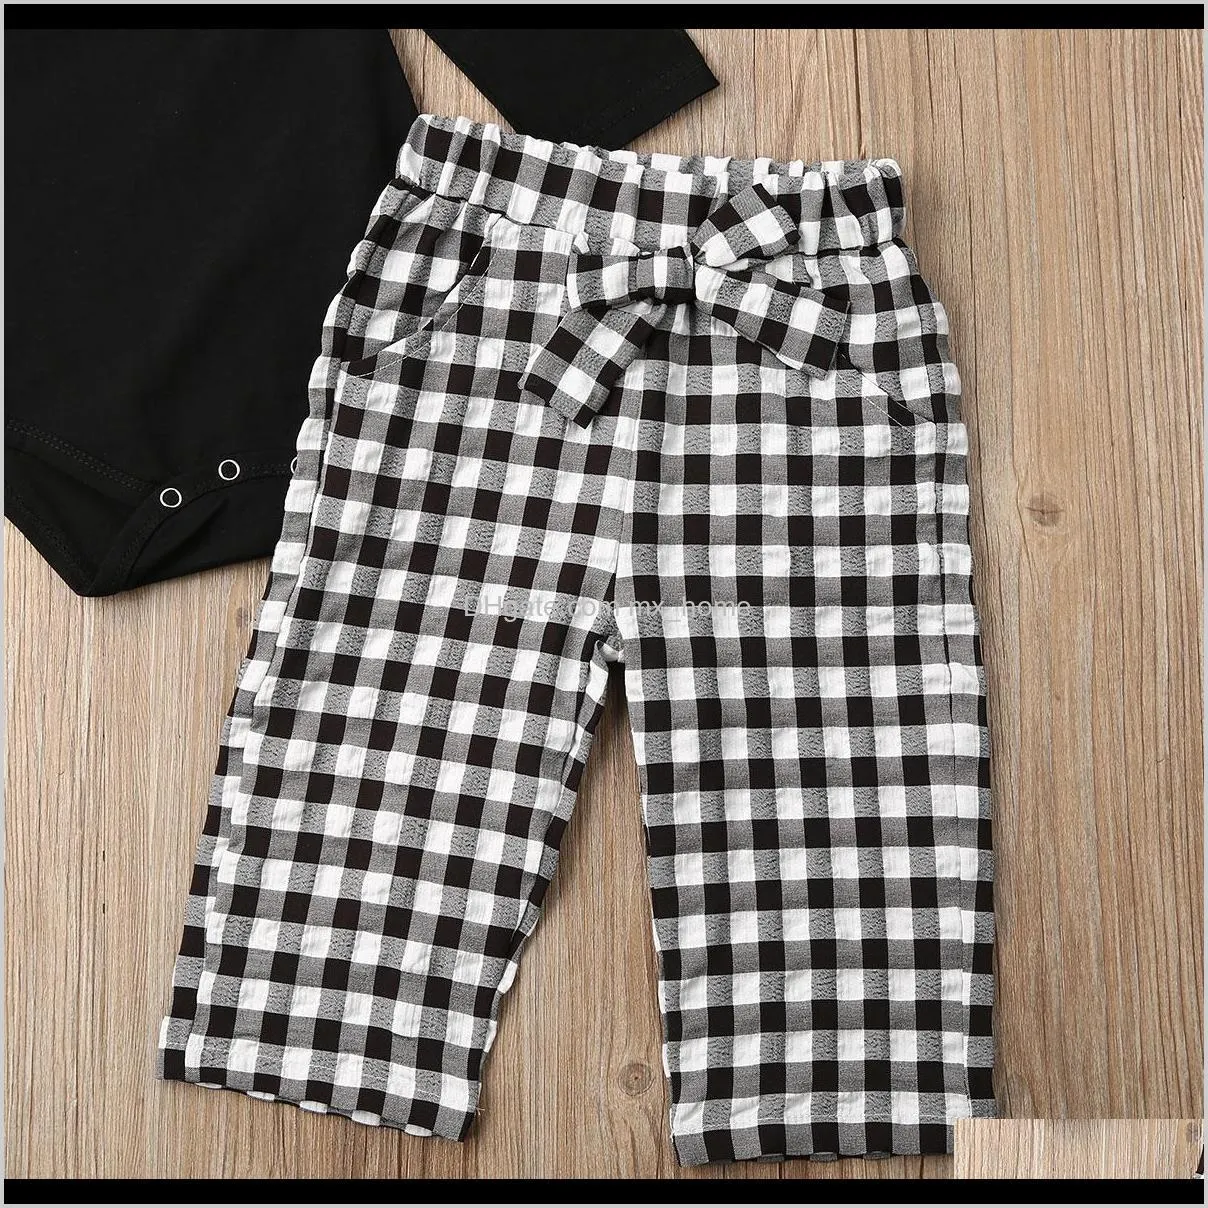 2pcs newborn kid baby girl clothes ruffle romper plaid wide pants autumn outfit